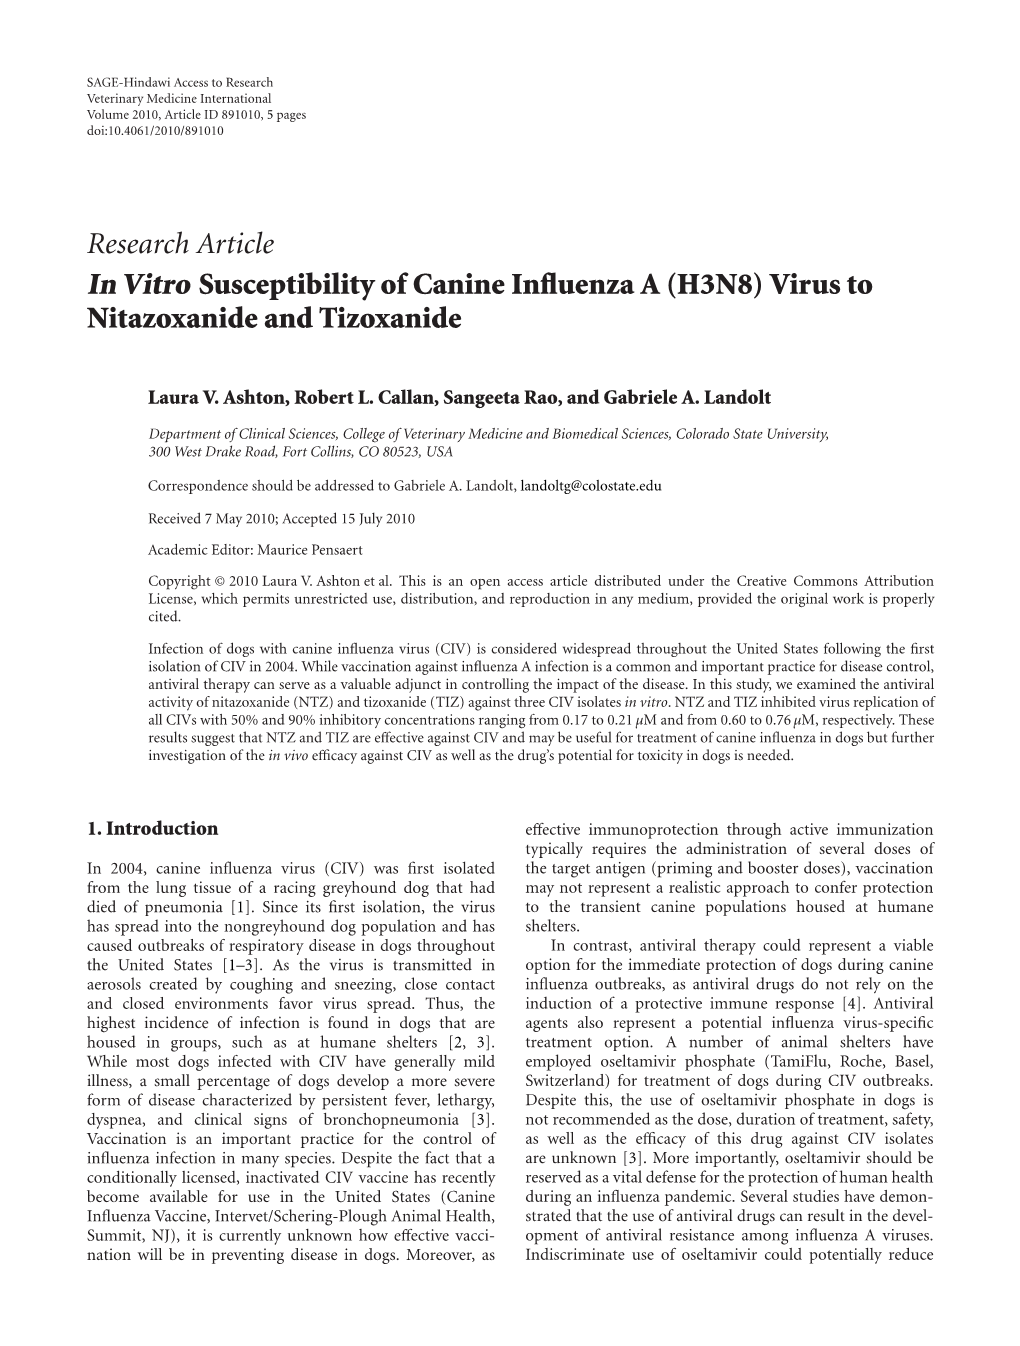 In Vitro Susceptibility of Canine Influenza a (H3N8) Virus To